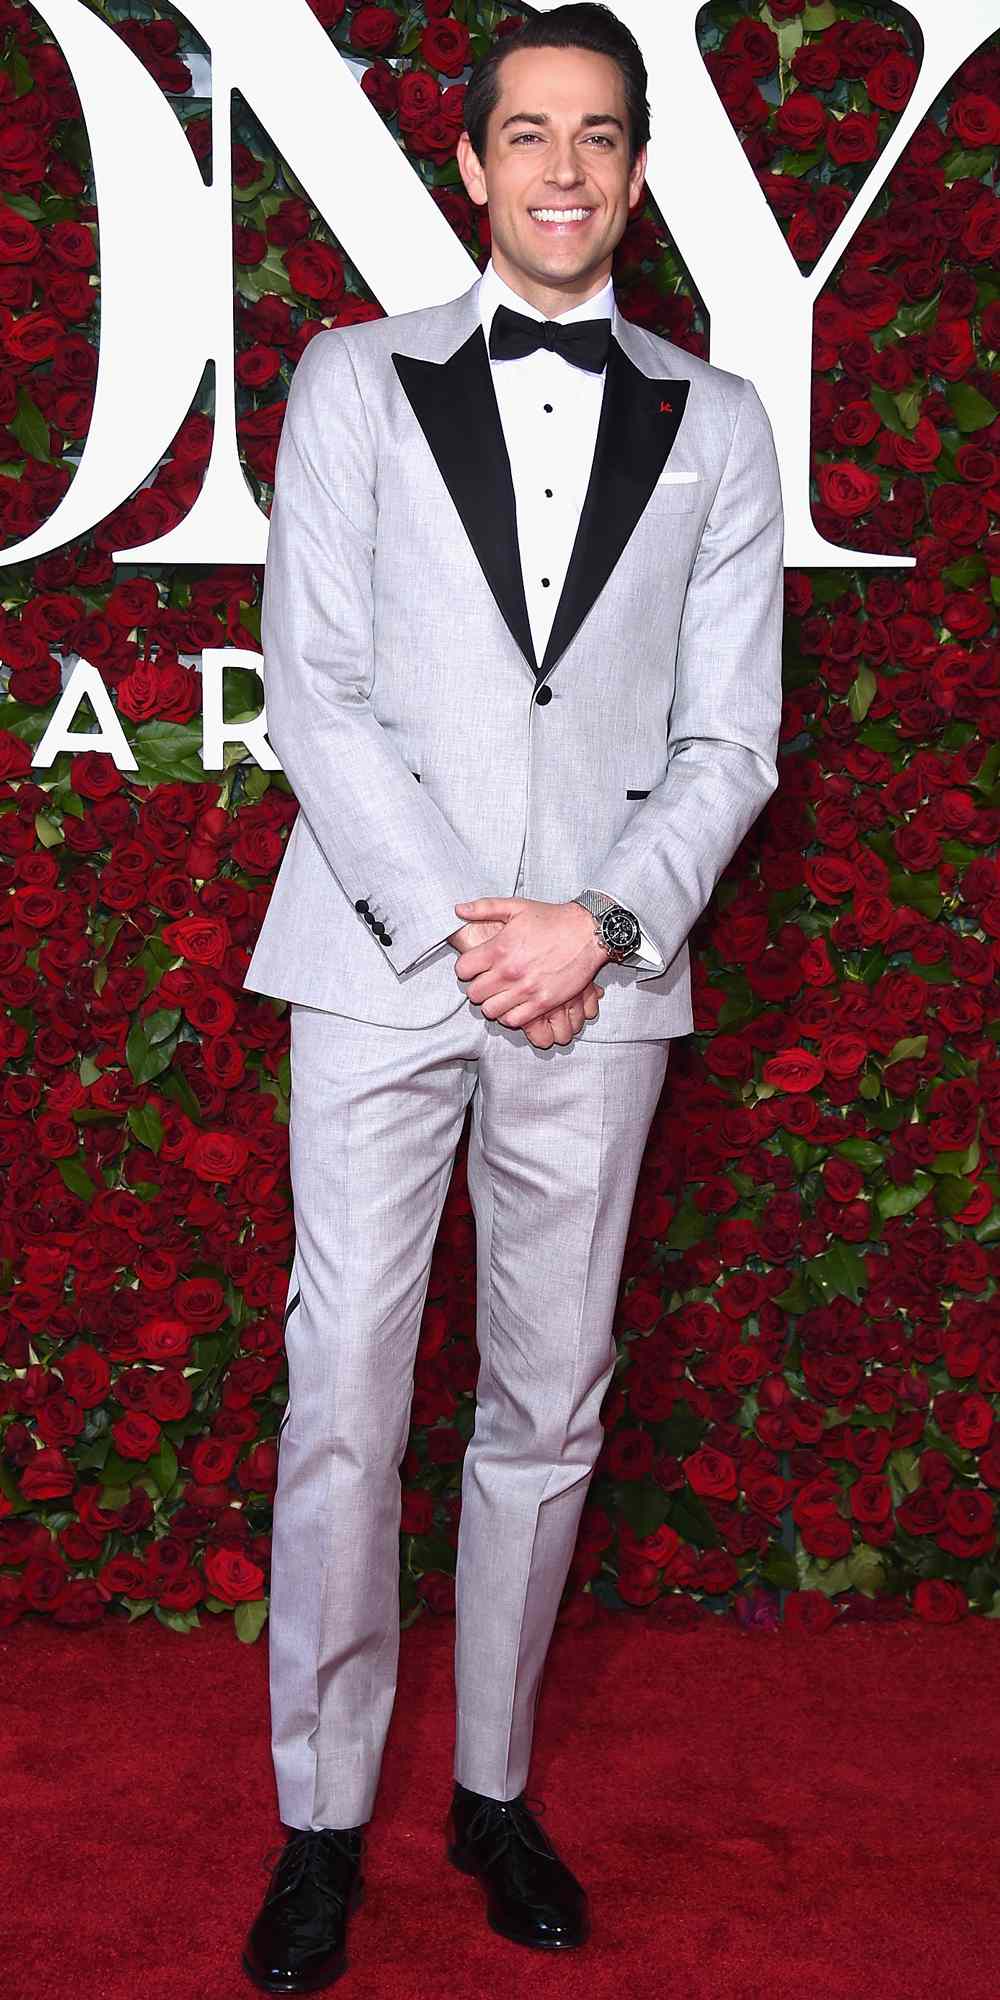 Zachary Levi attends the 70th Annual Tony Awards at The Beacon Theatre on June 12, 2016 in New York City.